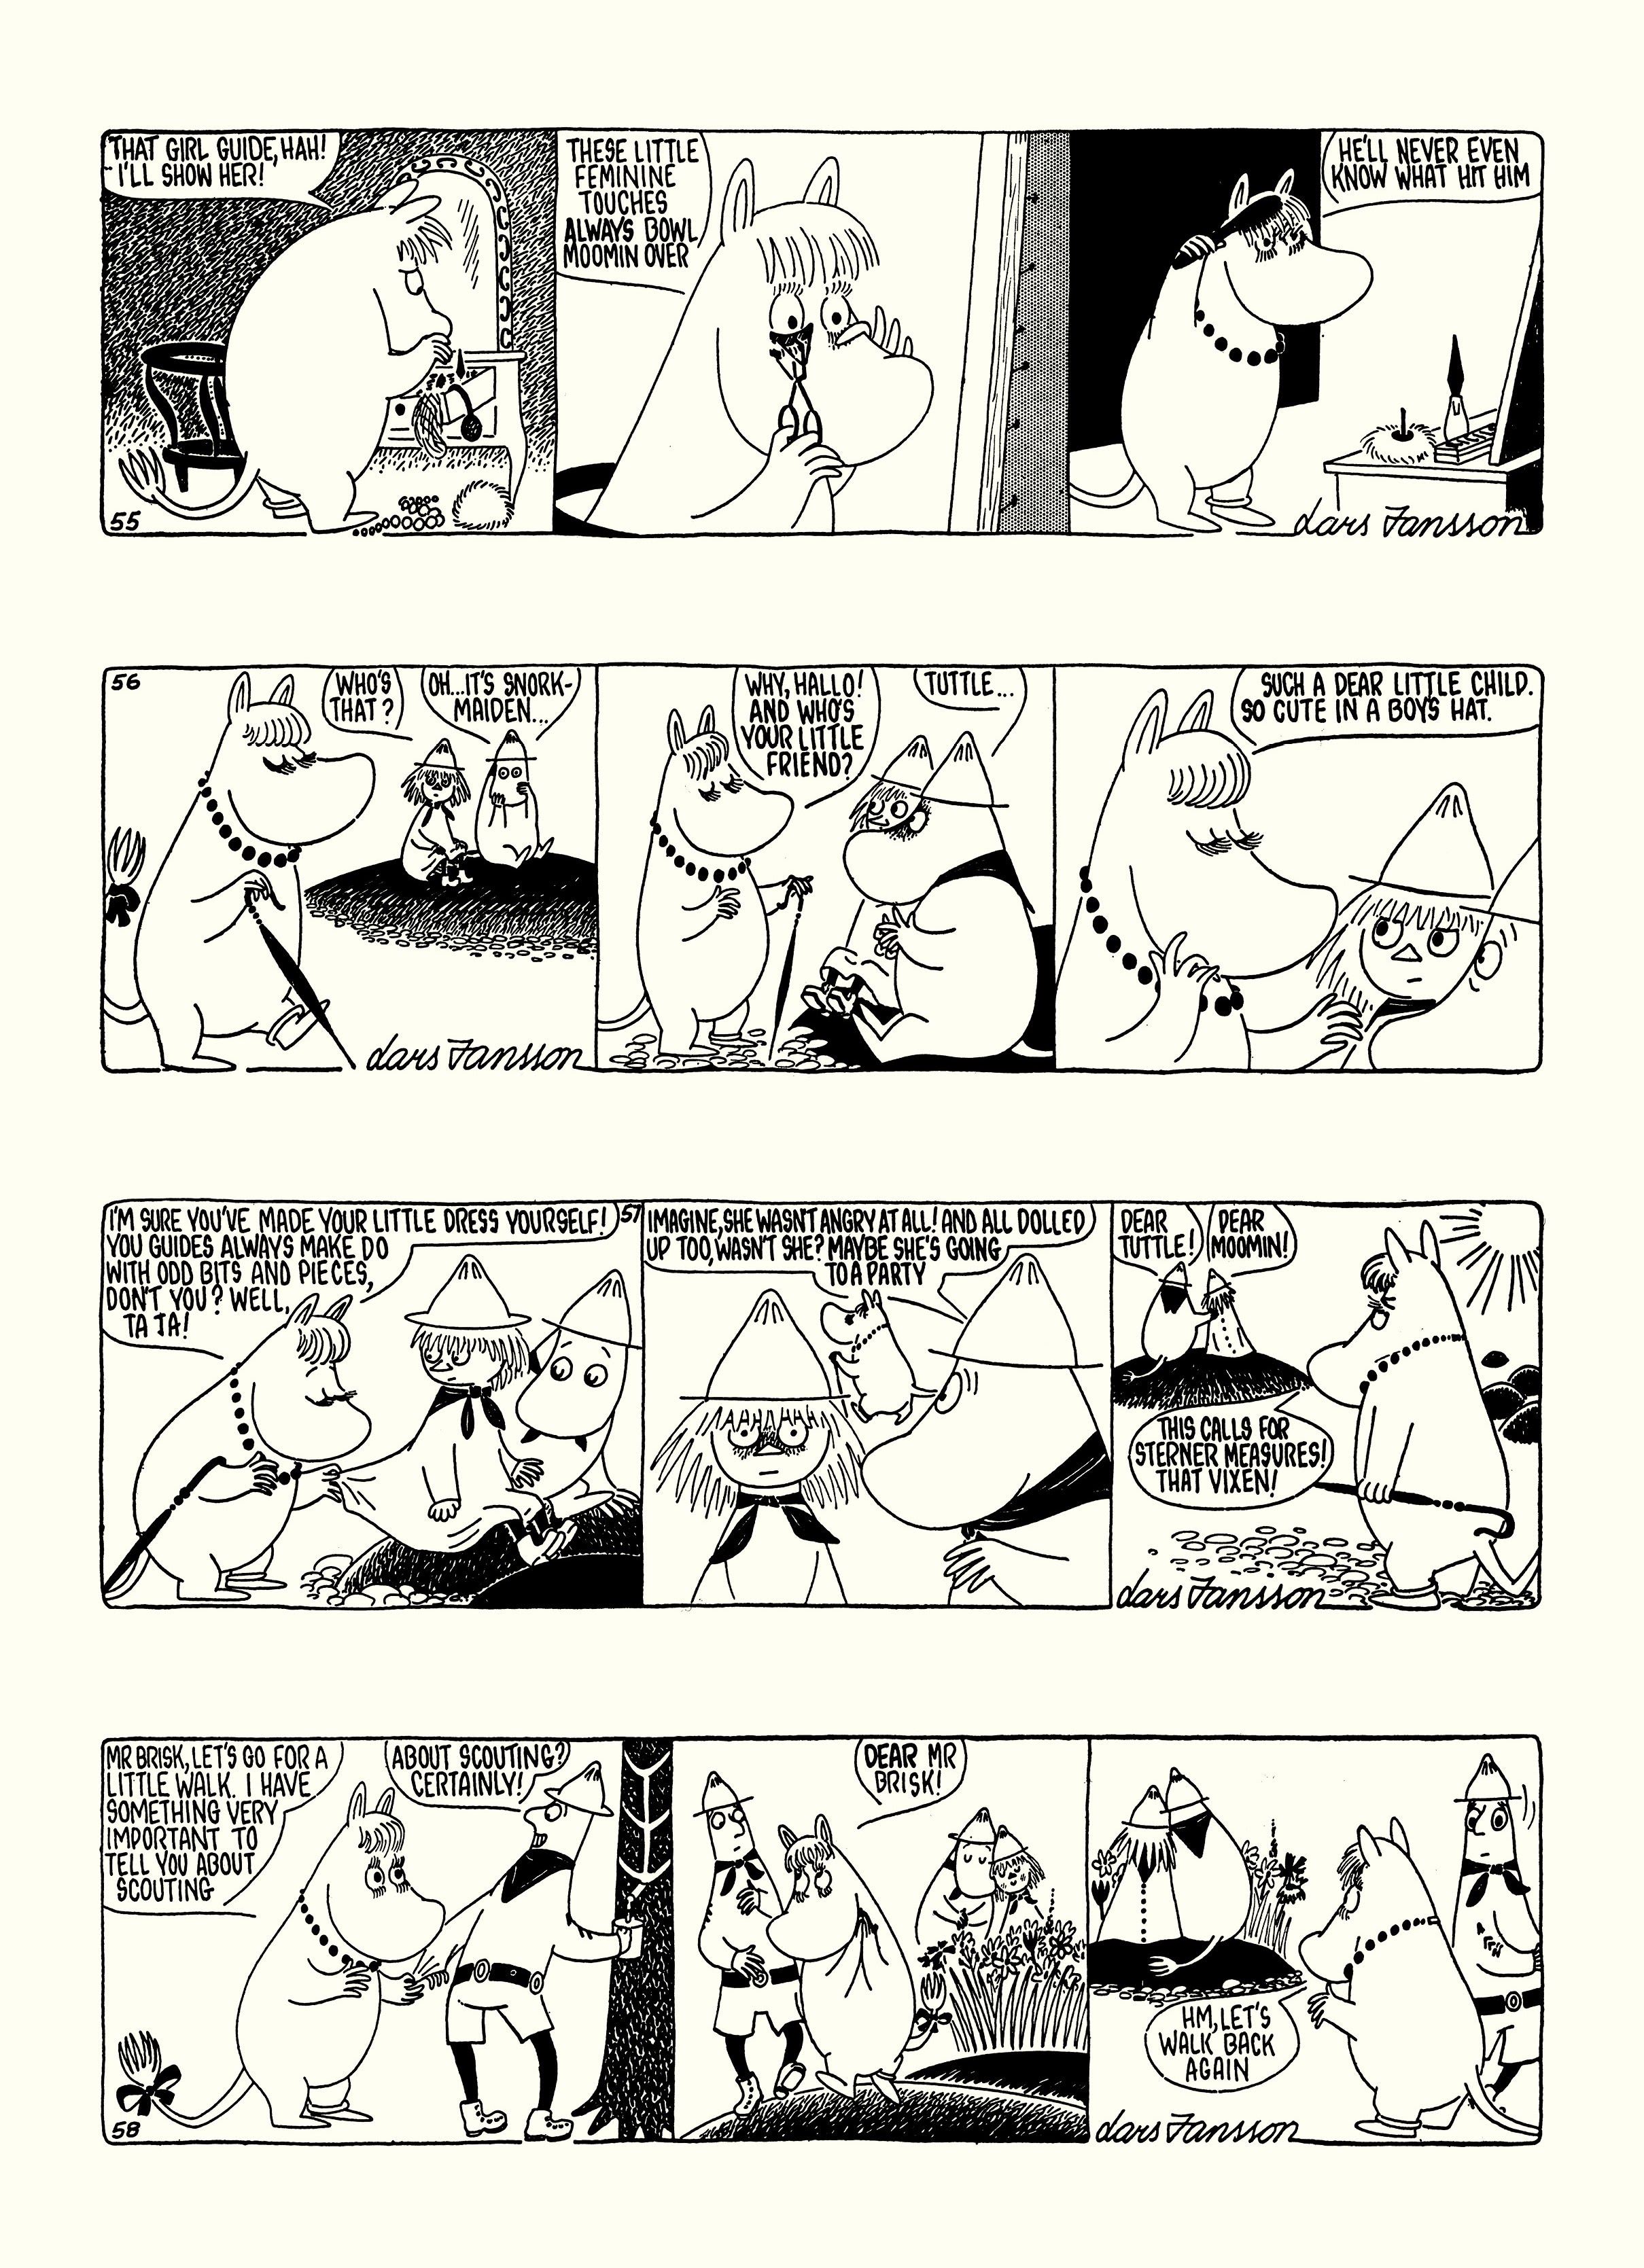 Read online Moomin: The Complete Lars Jansson Comic Strip comic -  Issue # TPB 7 - 41